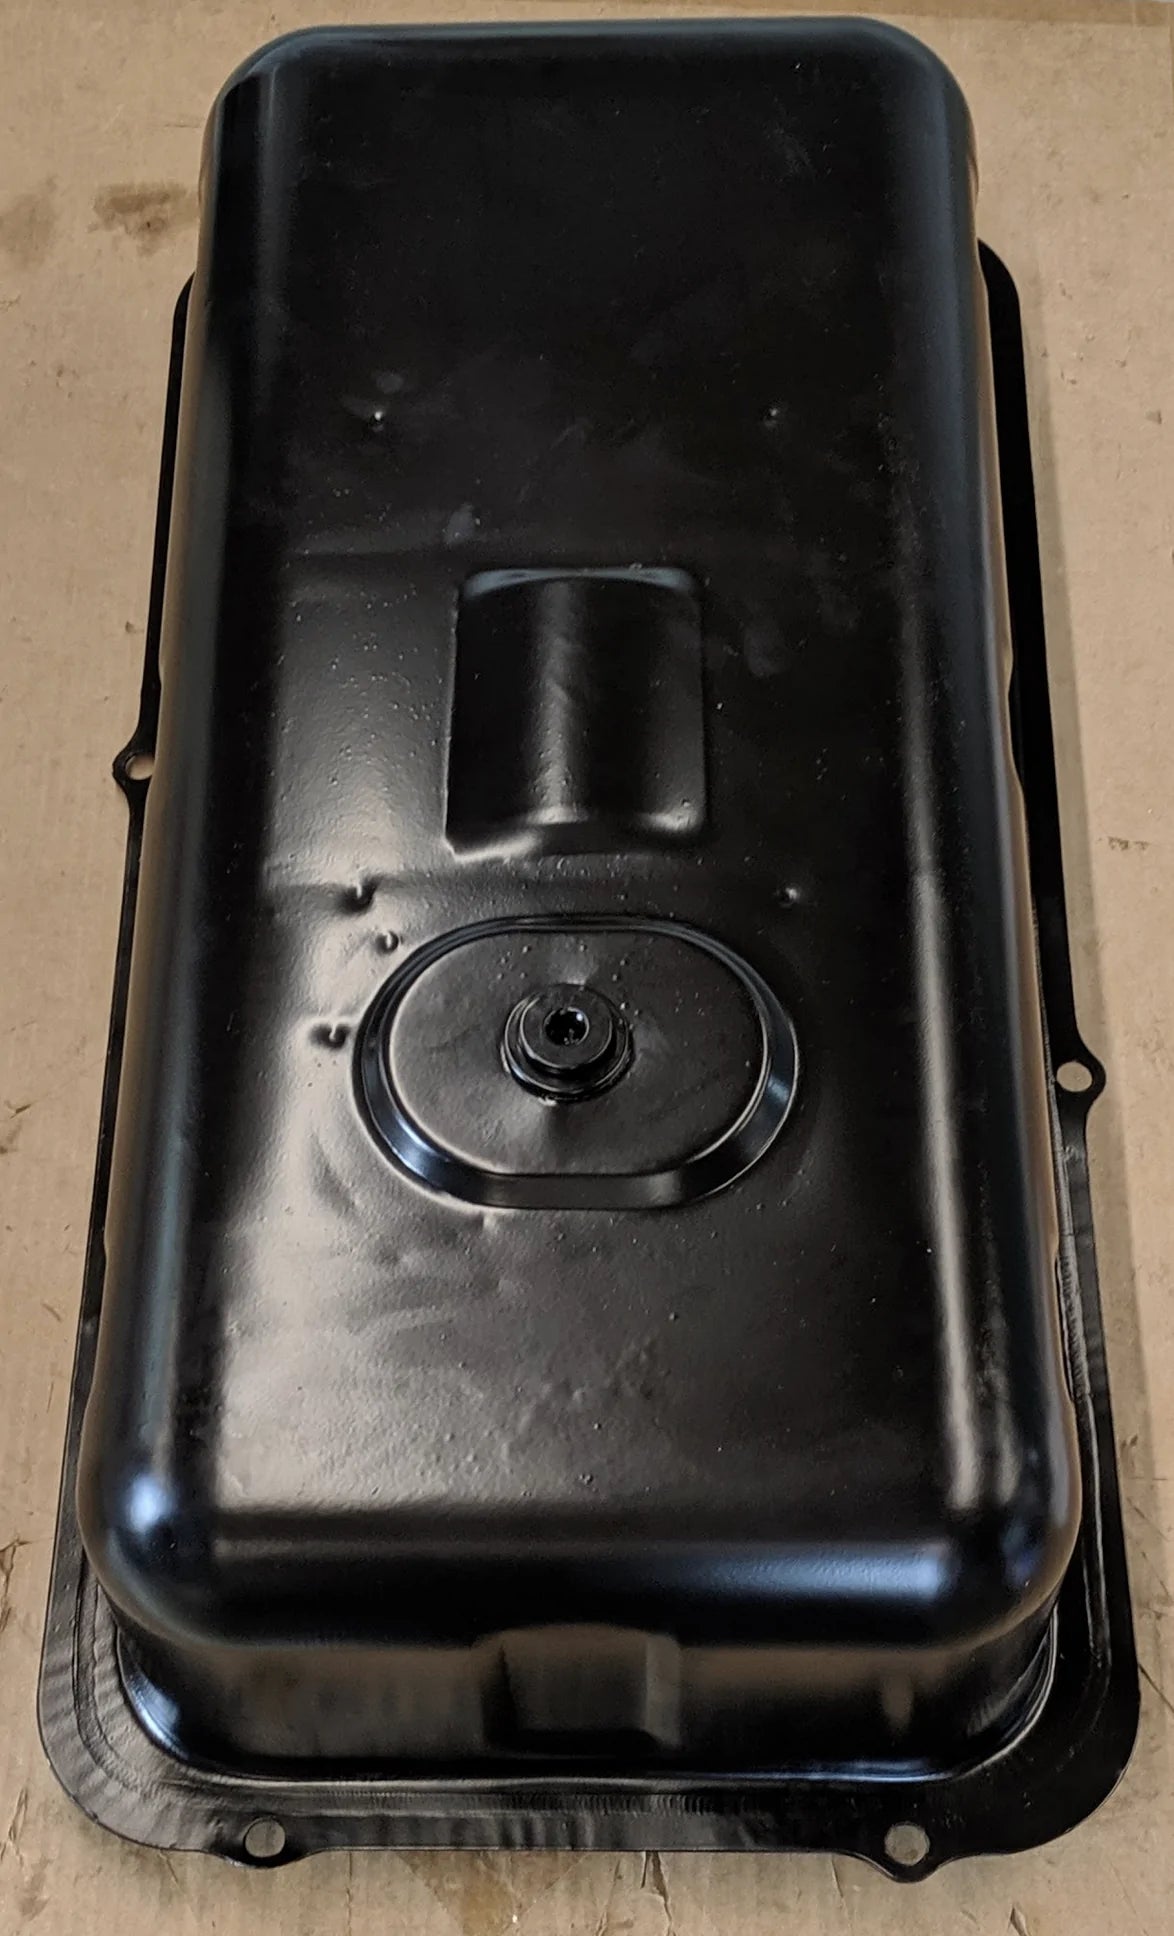 Austin Healey Sprite Bugeye Sprite Mark 1 Fuel Tank Kits-sealed, pressure tested, ethanol-proof and ready to install Mechanical - Bugeye